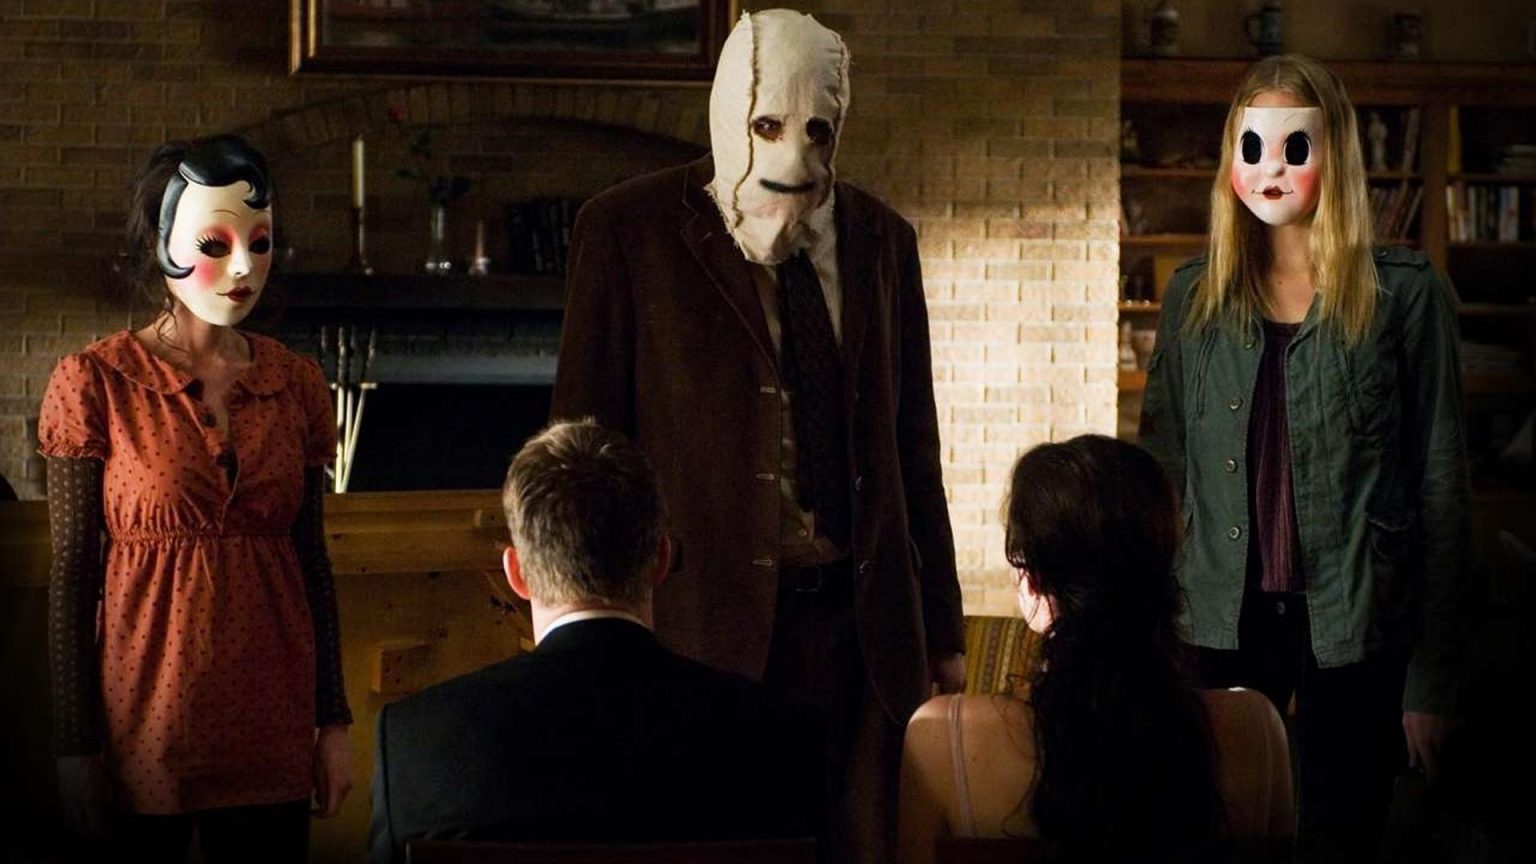 The Strangers LimitedEdition Bluray Box Set is heading our way Live